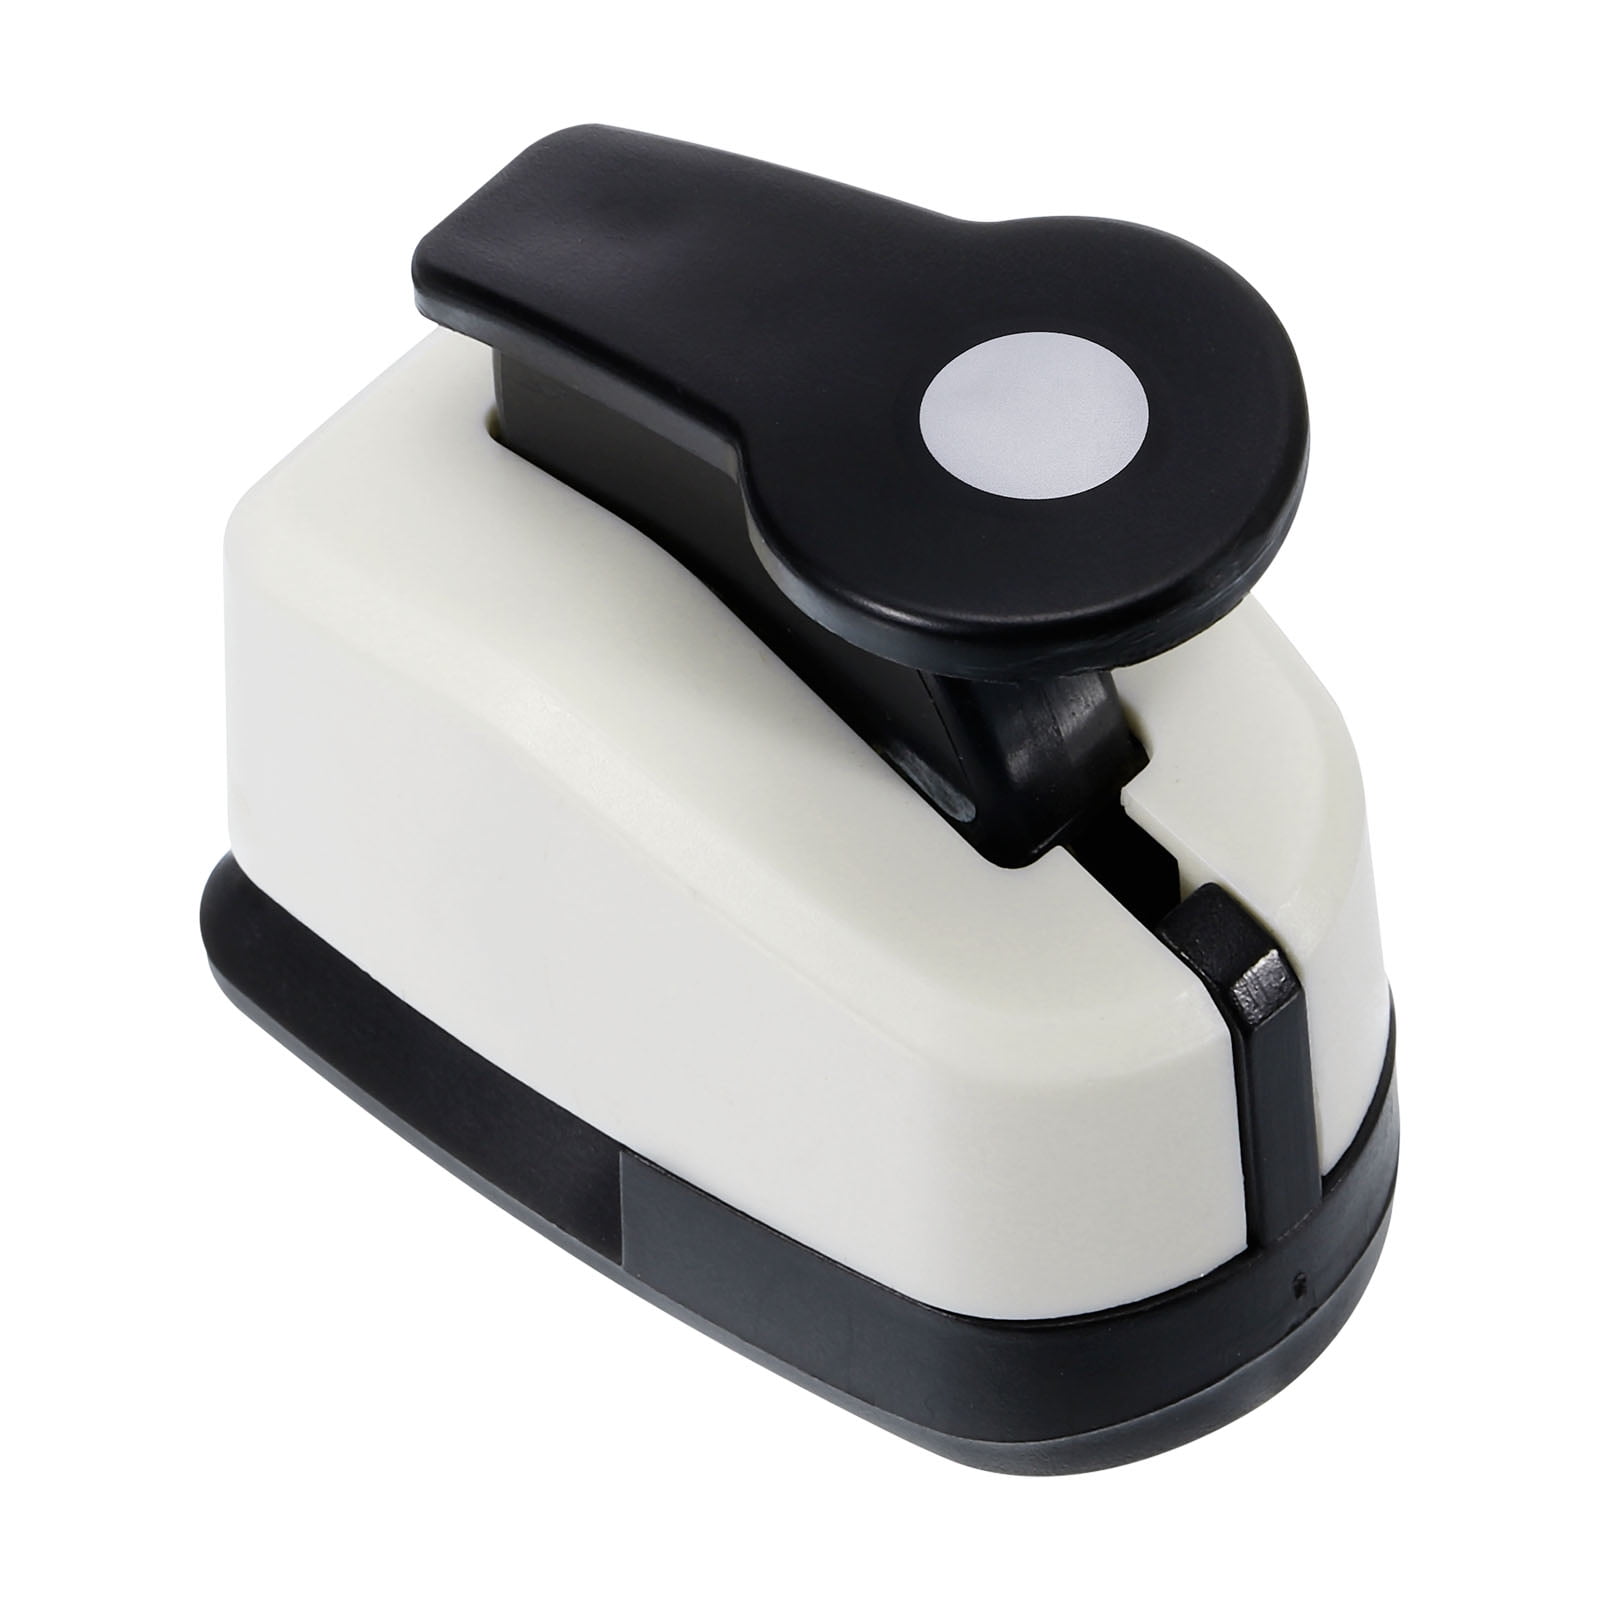 30-Sheet Heavy-Duty Three-Hole Punch with Gel Padded Handle by